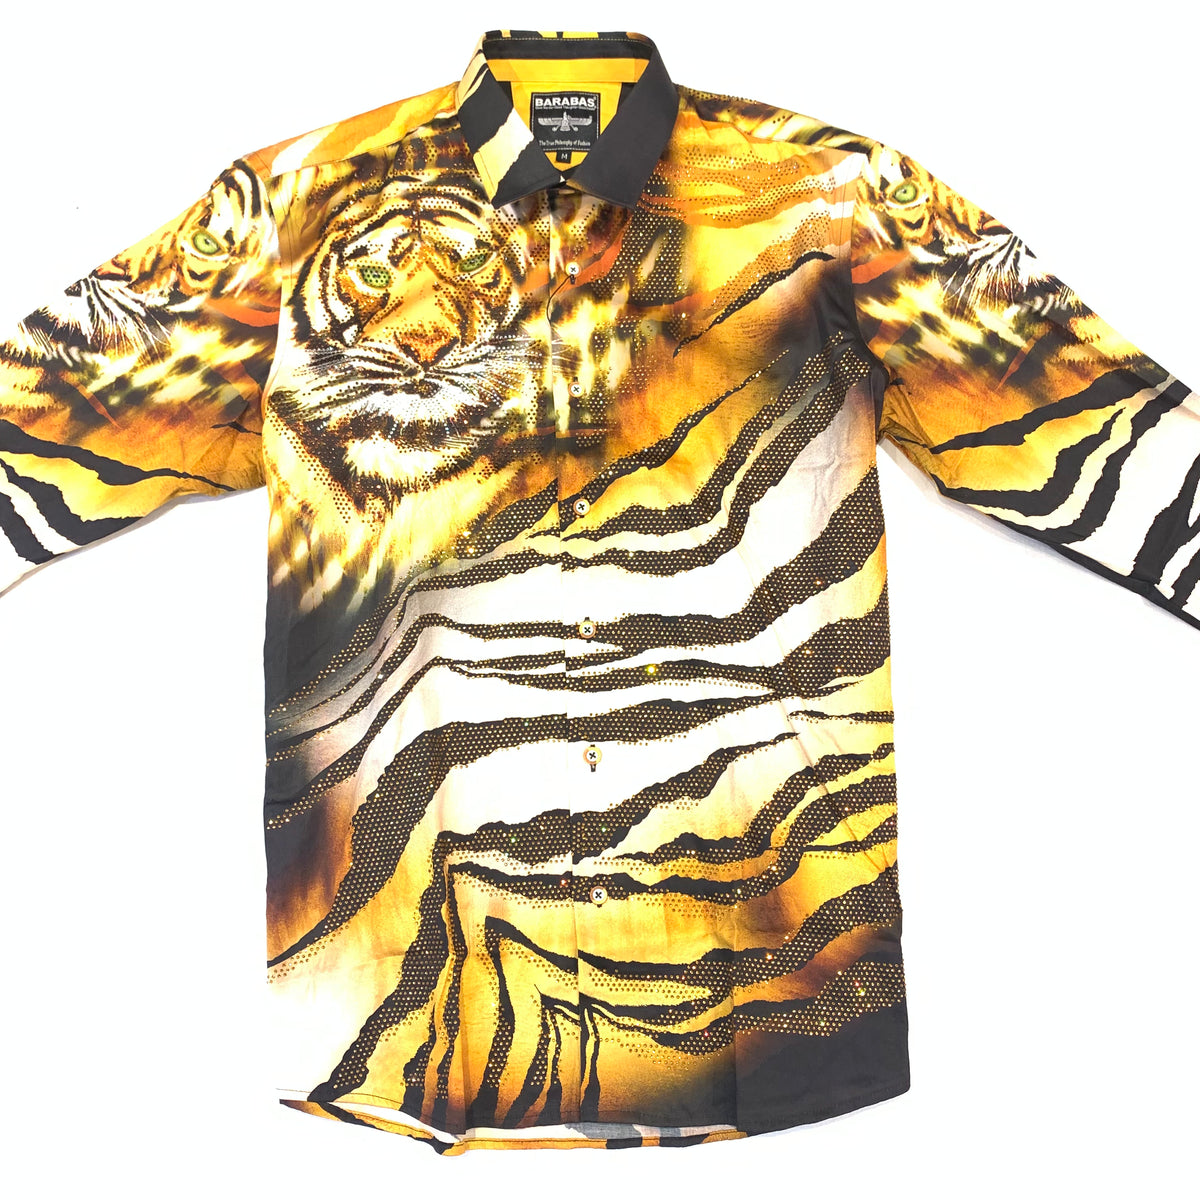 Barabas 'ON THE PROWL' Orange Crystal Button Up Shirt - Dudes Boutique